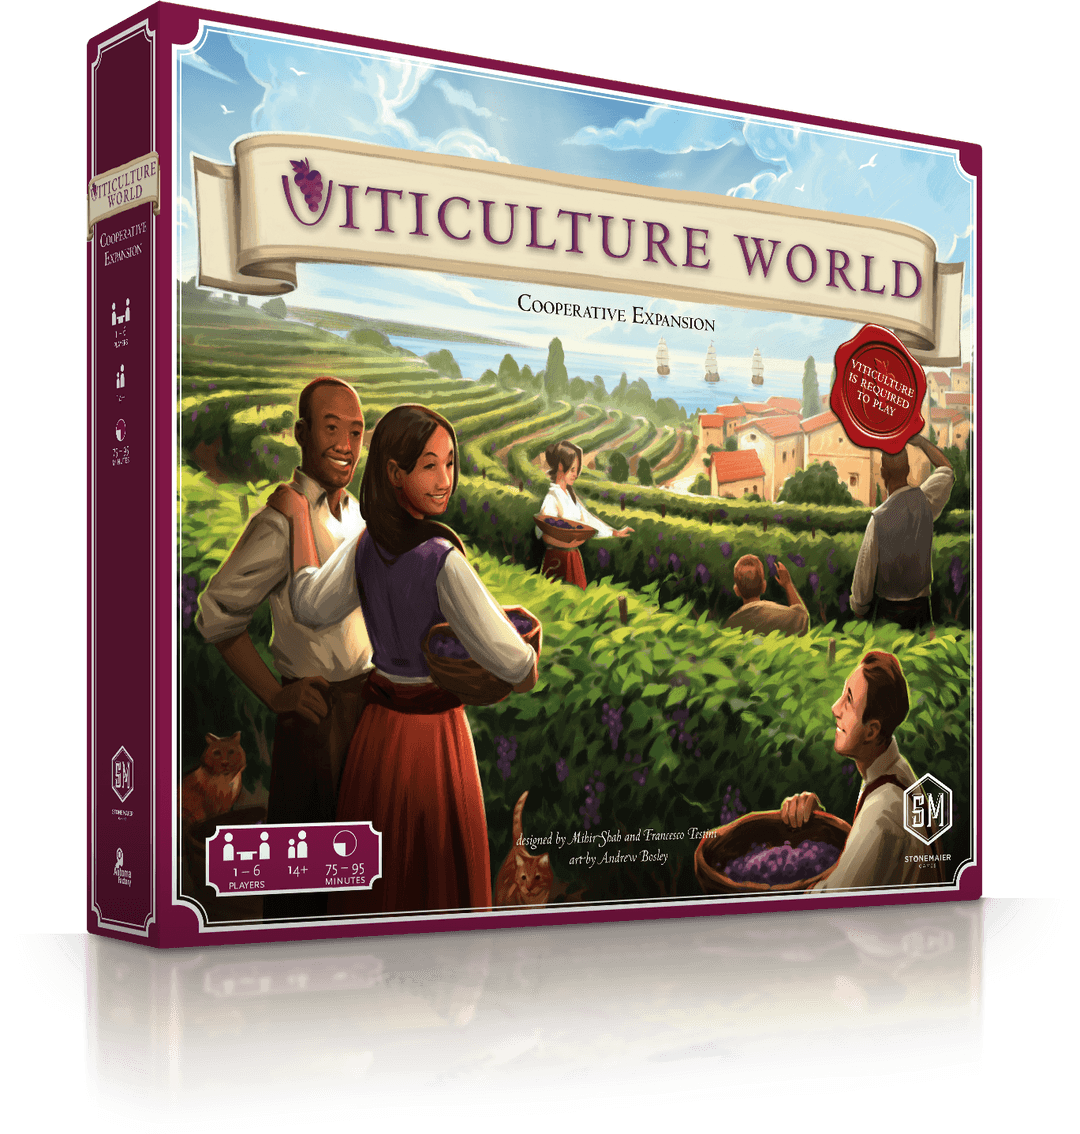 Viticulture World (Cooperative Expansion) - The Fourth Place